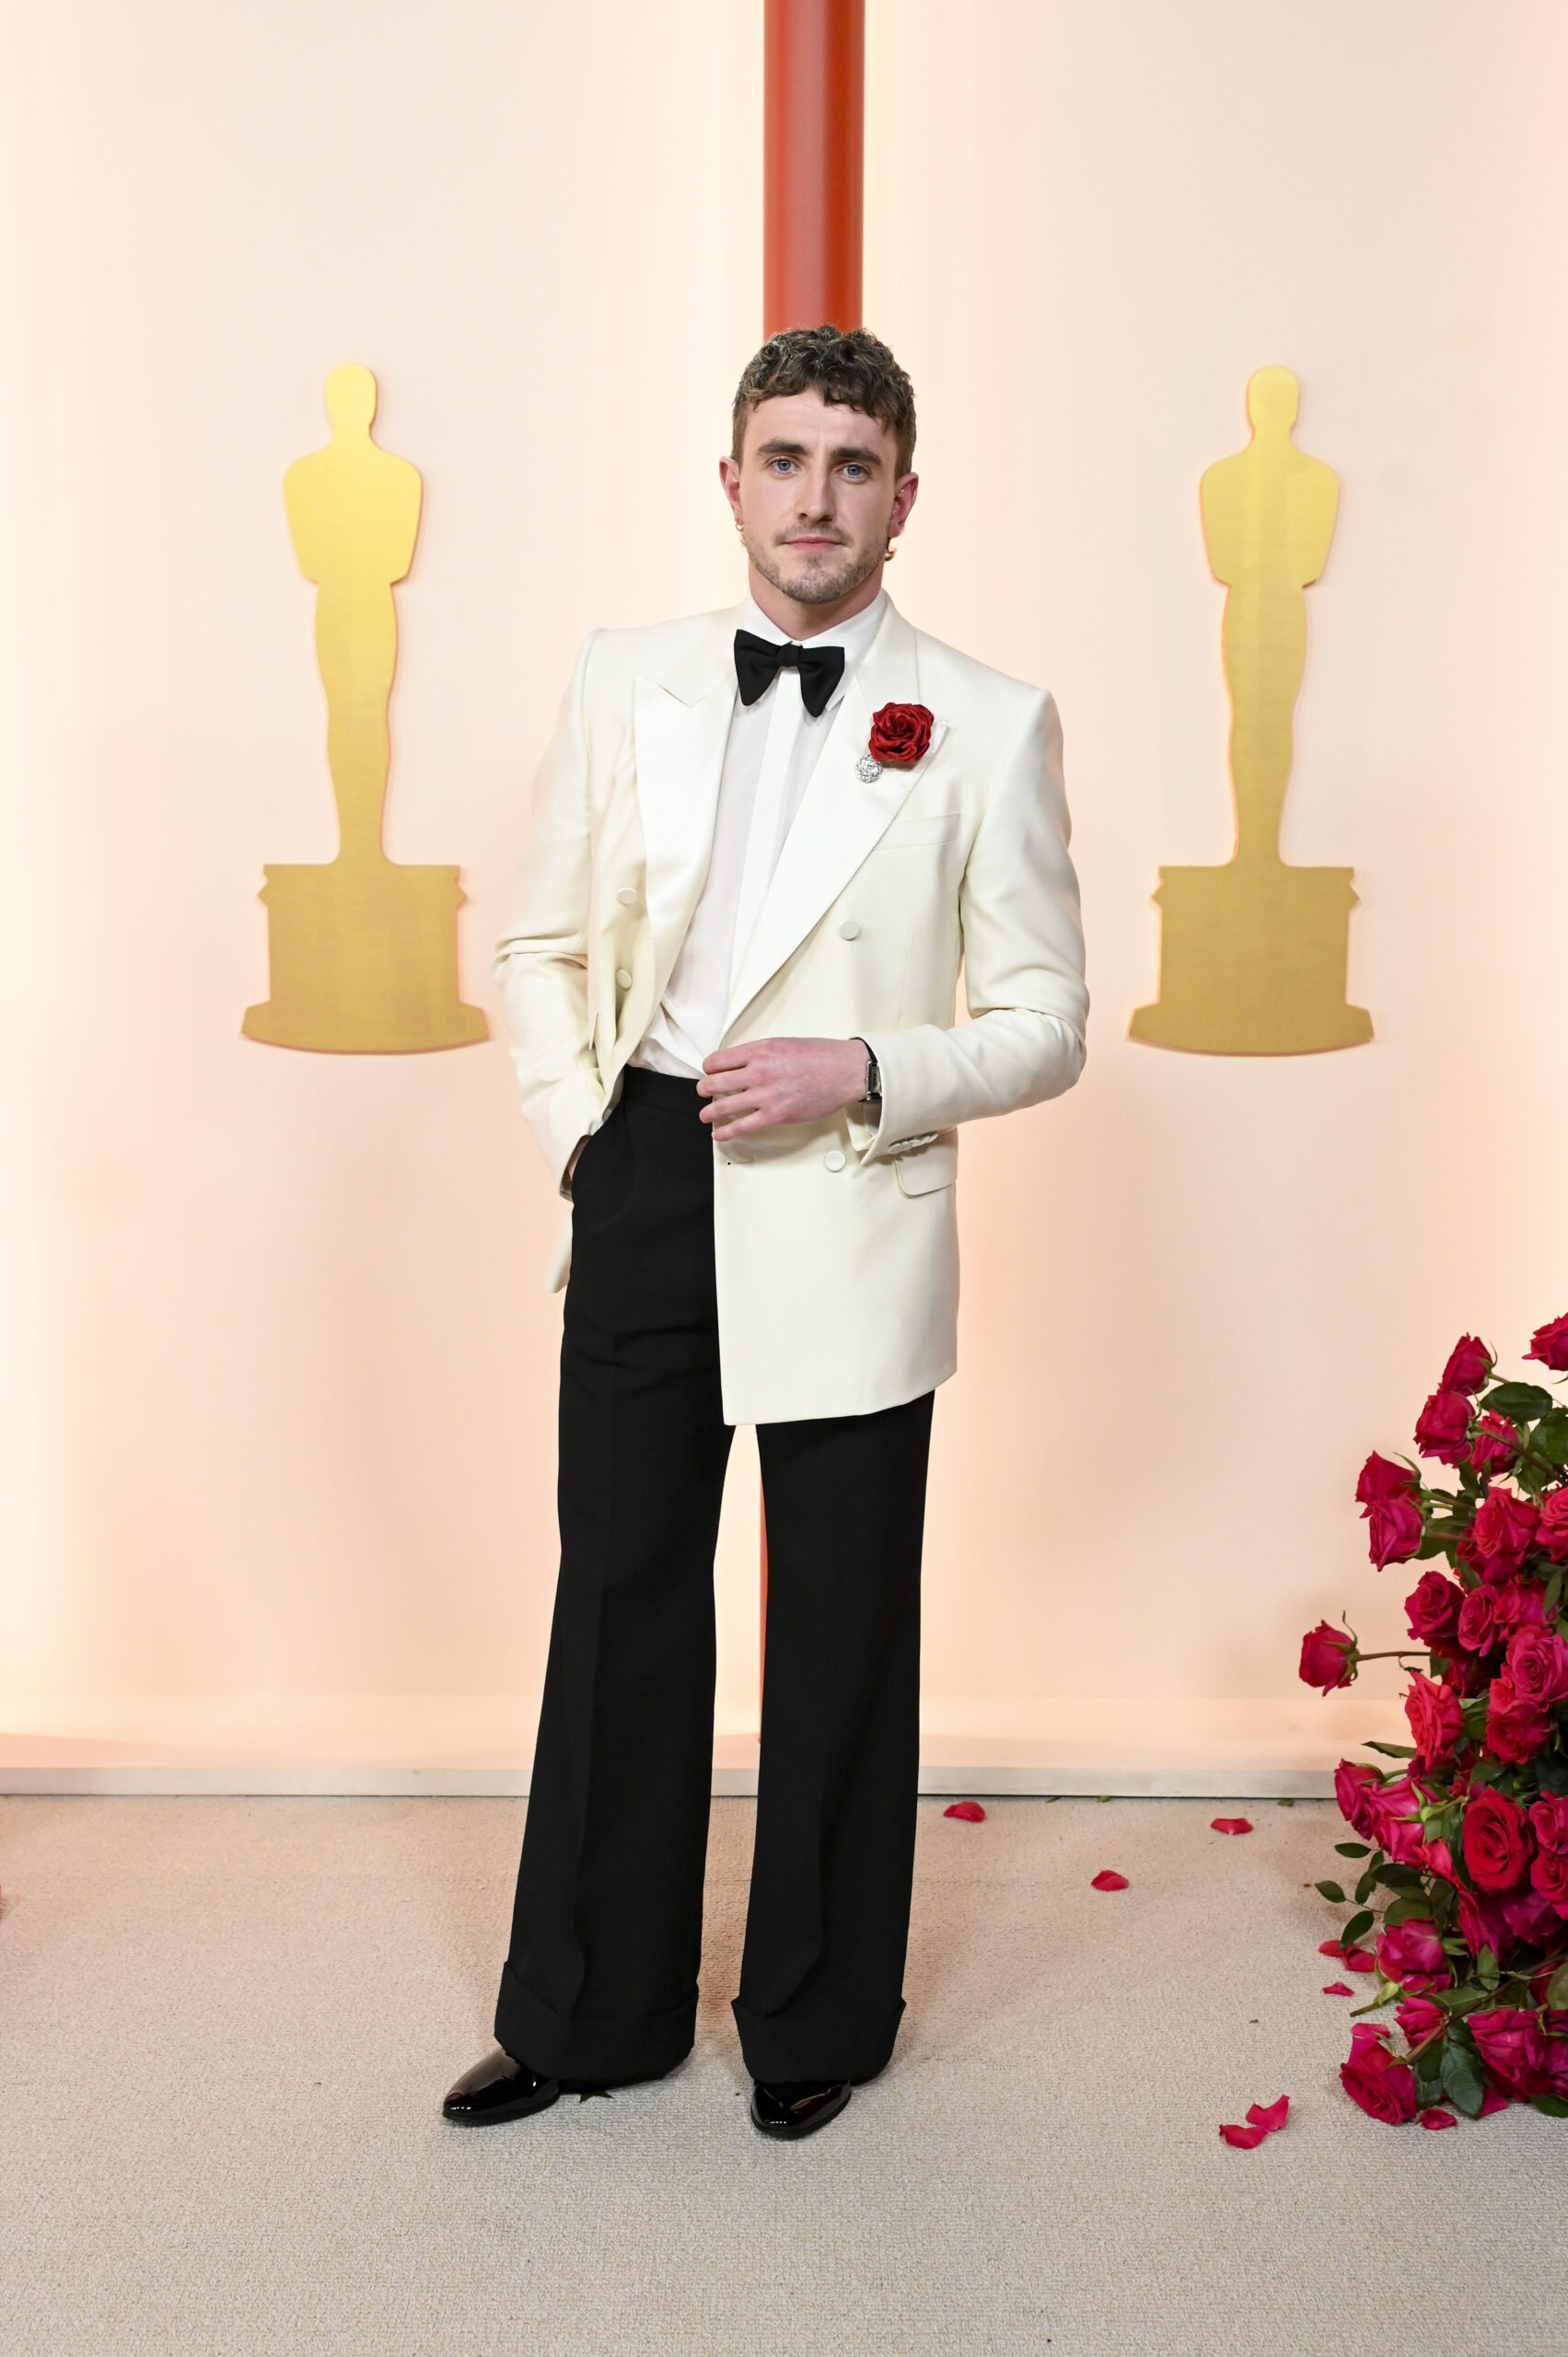 Paul Mescal, nominated for Best Actor in a Leading Role for ‘Aftersun,’ wore a custom Gucci ivory double-breasted tuxedo jacket, white evening shirt, black bowtie, and black patent leather lace-ups.